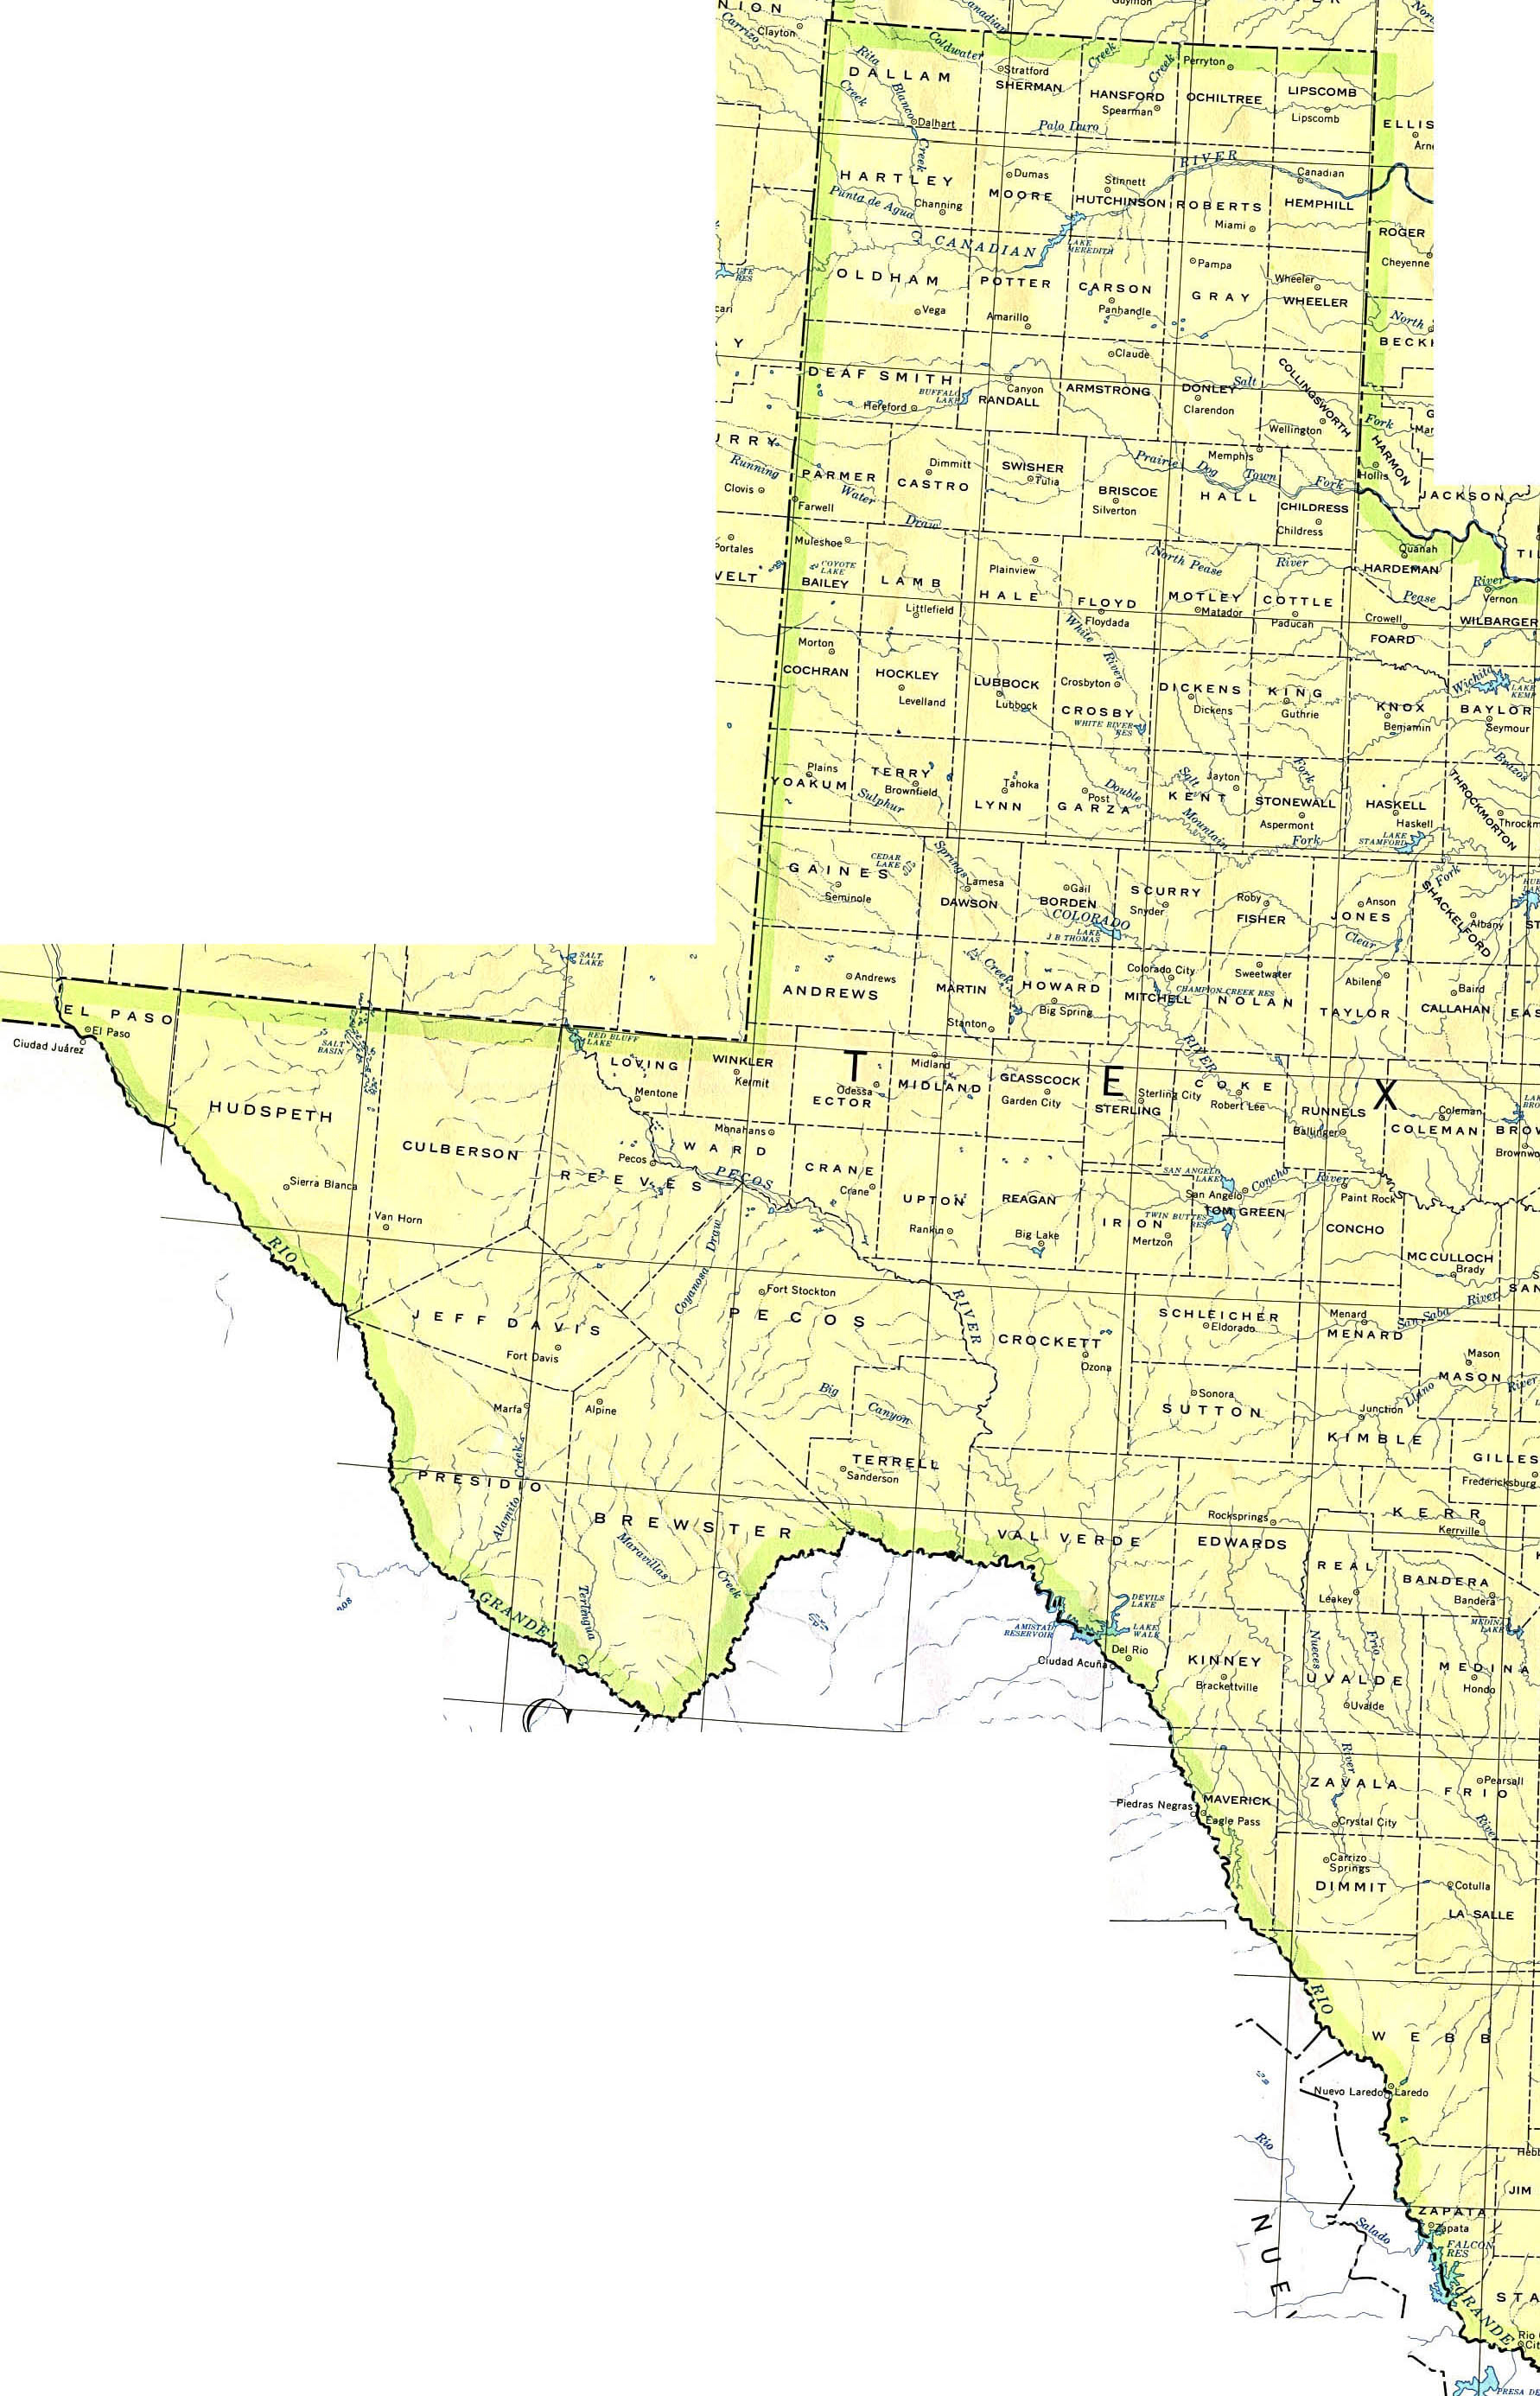 Texas Maps - Perry-Castañeda Map Collection - Ut Library Online - Texas County Gis Map